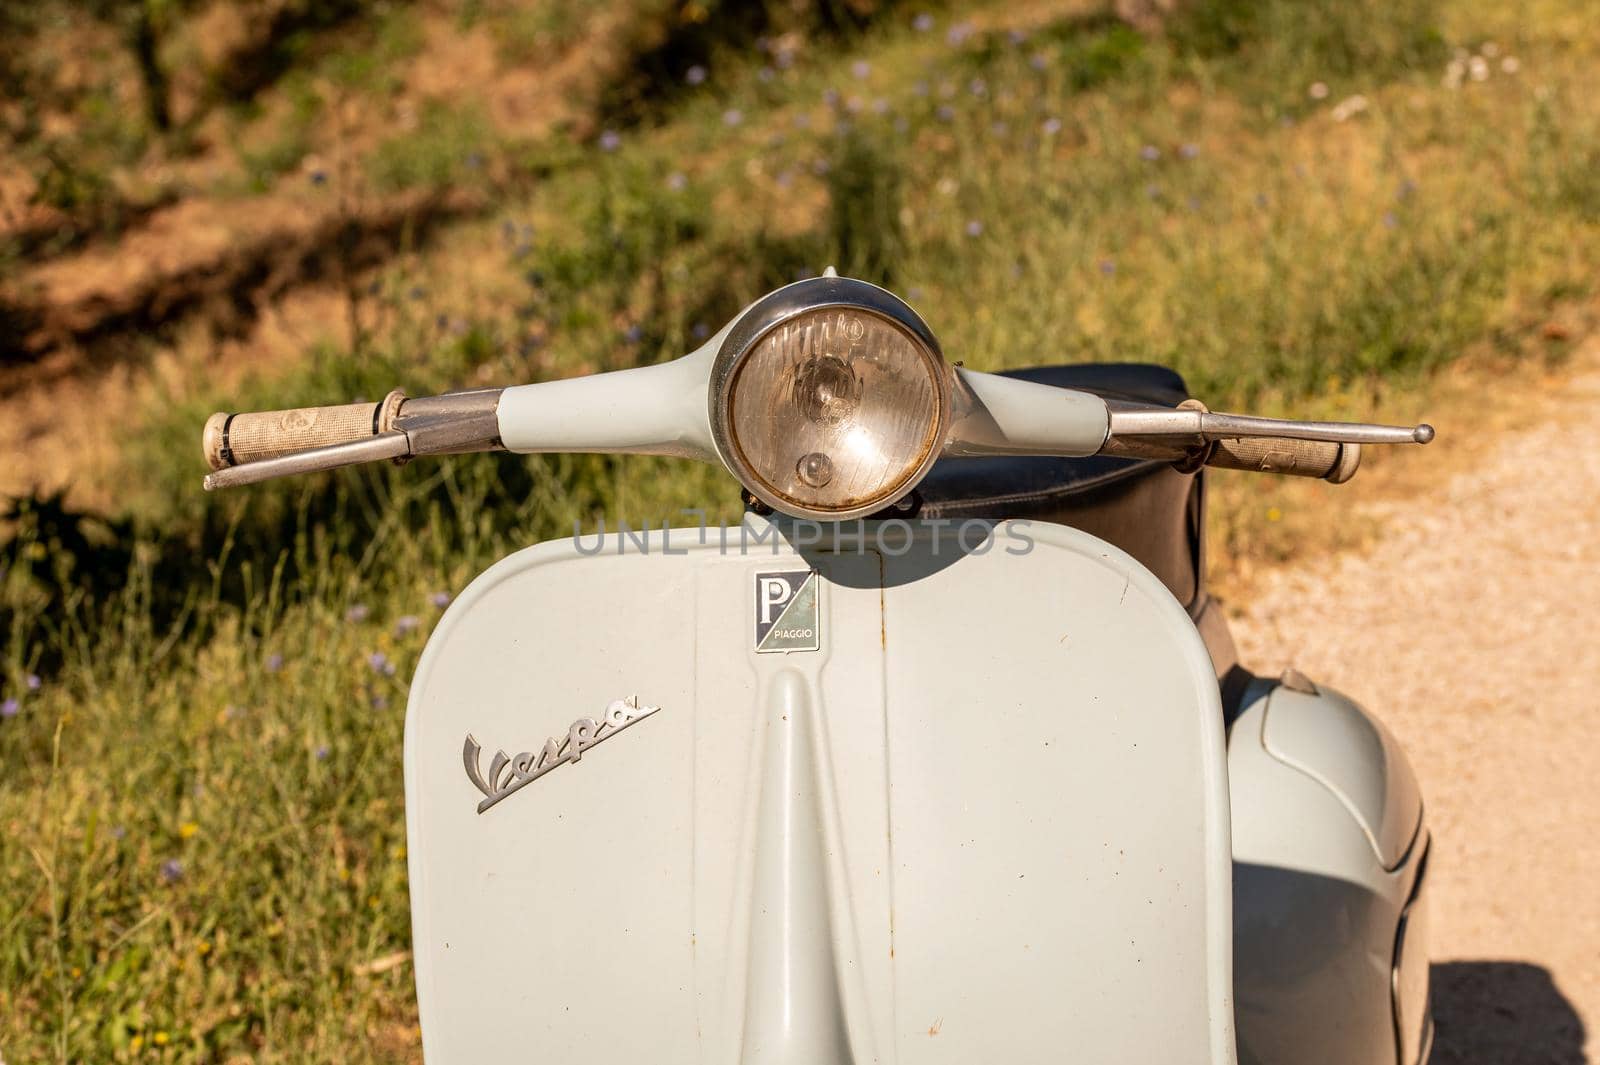 front light vespa special by carfedeph